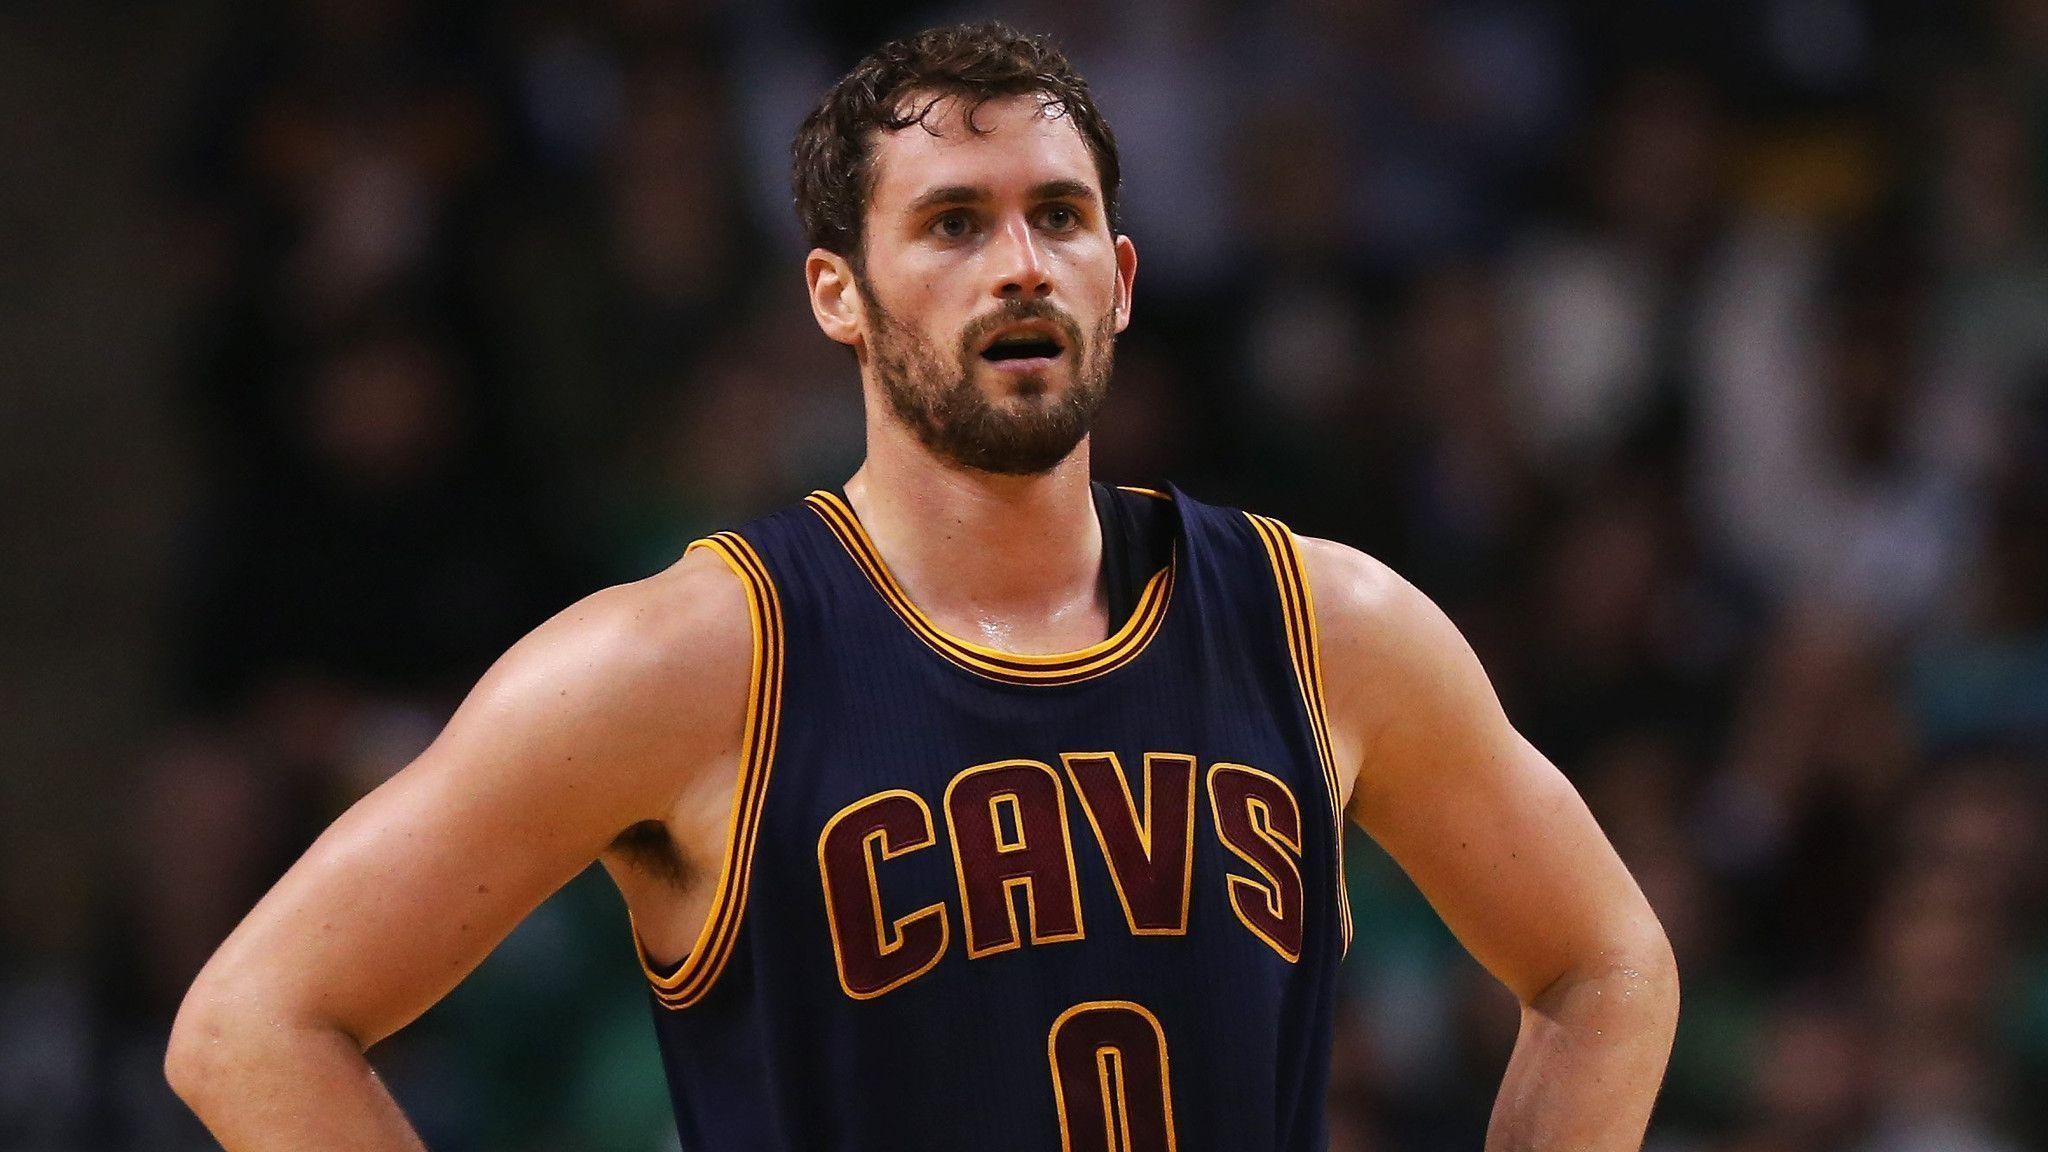 Kevin Love says he plans to return to Cleveland Cavaliers next